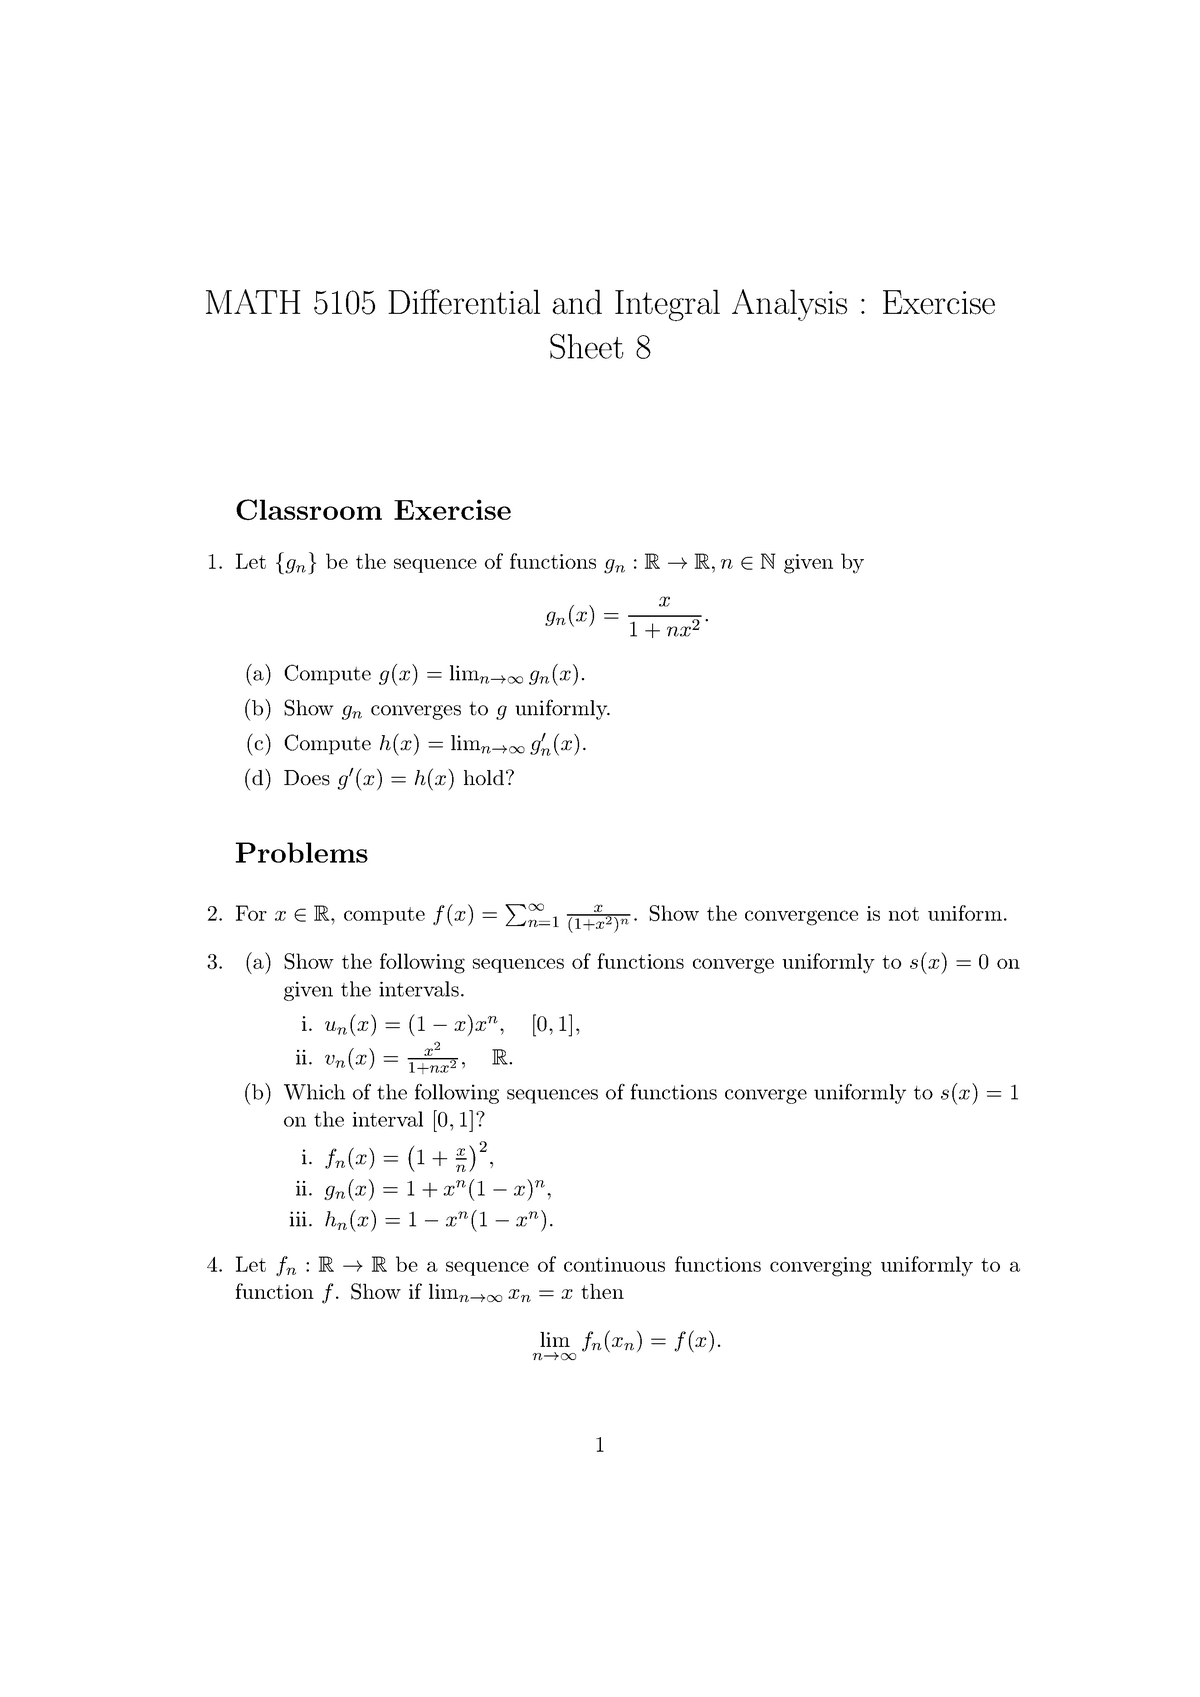 Course Worksheet 8 Differential And Integral Analysis MATH 5105 Differential And Integral